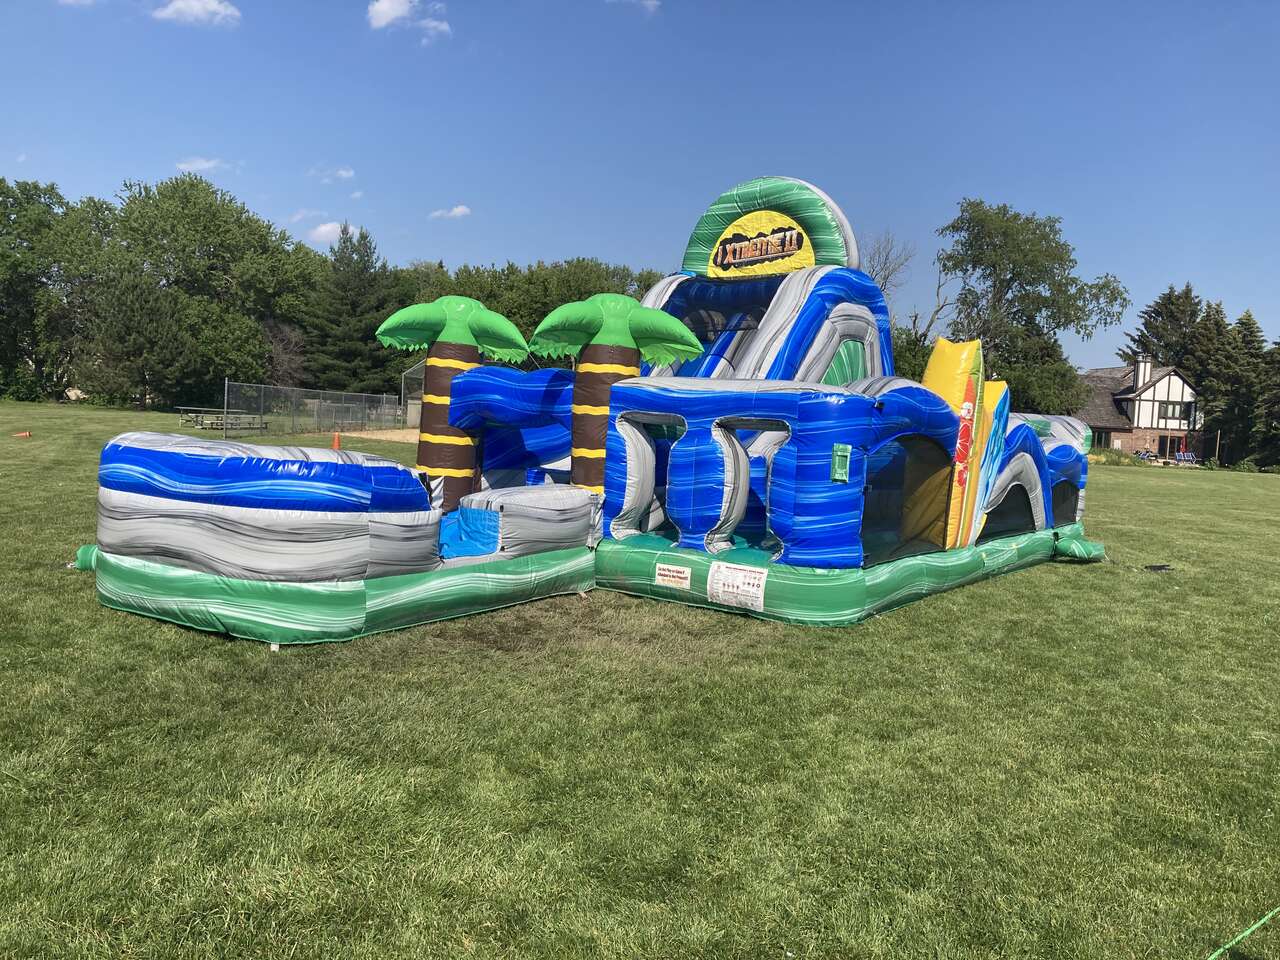 Niles Inflatable obstacle course rentals